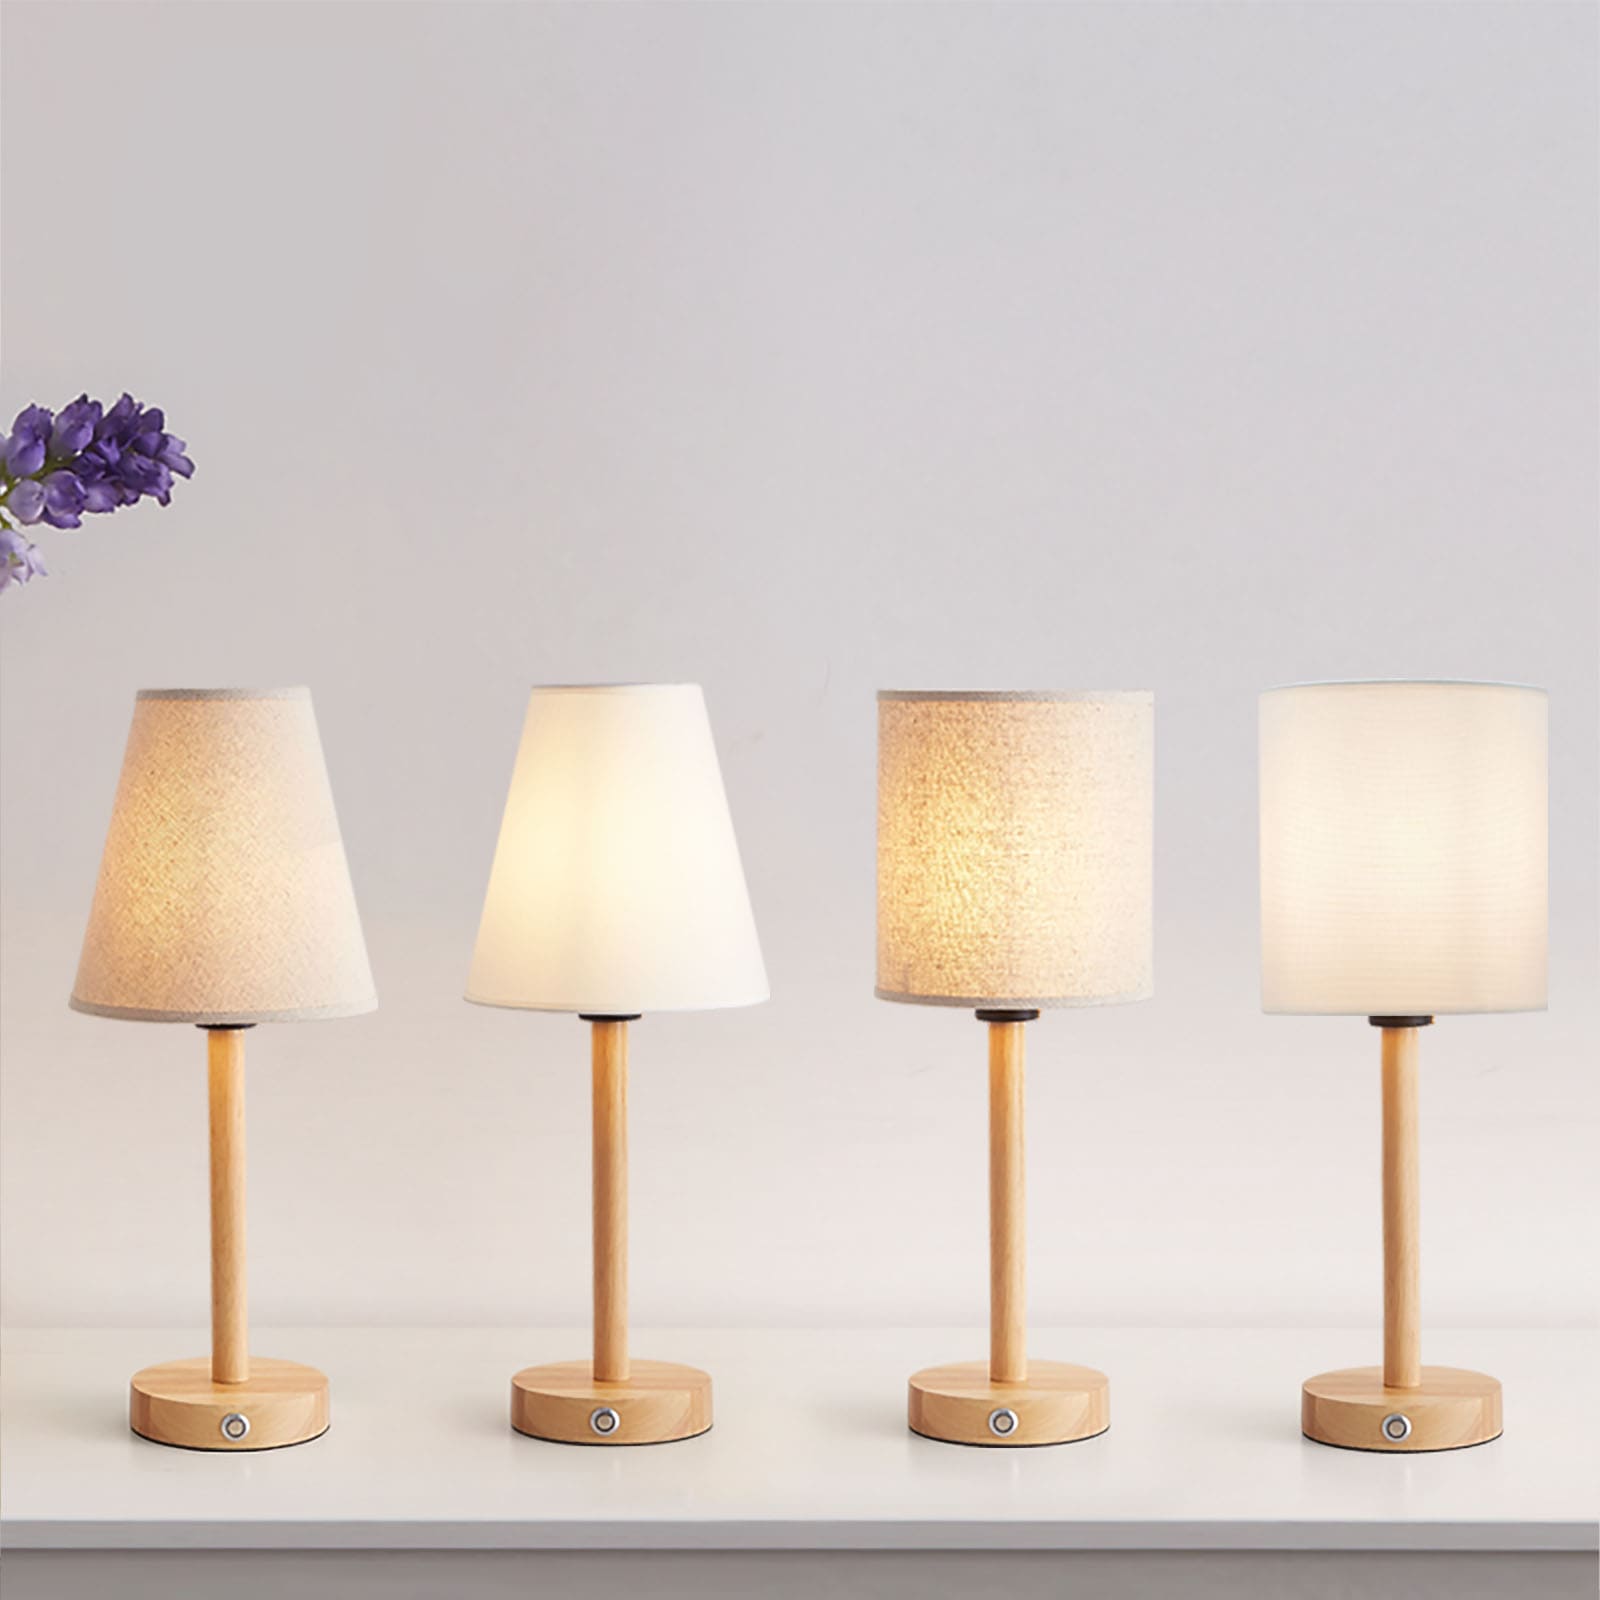 Nordic Style Wooden Table Lamp Collection View